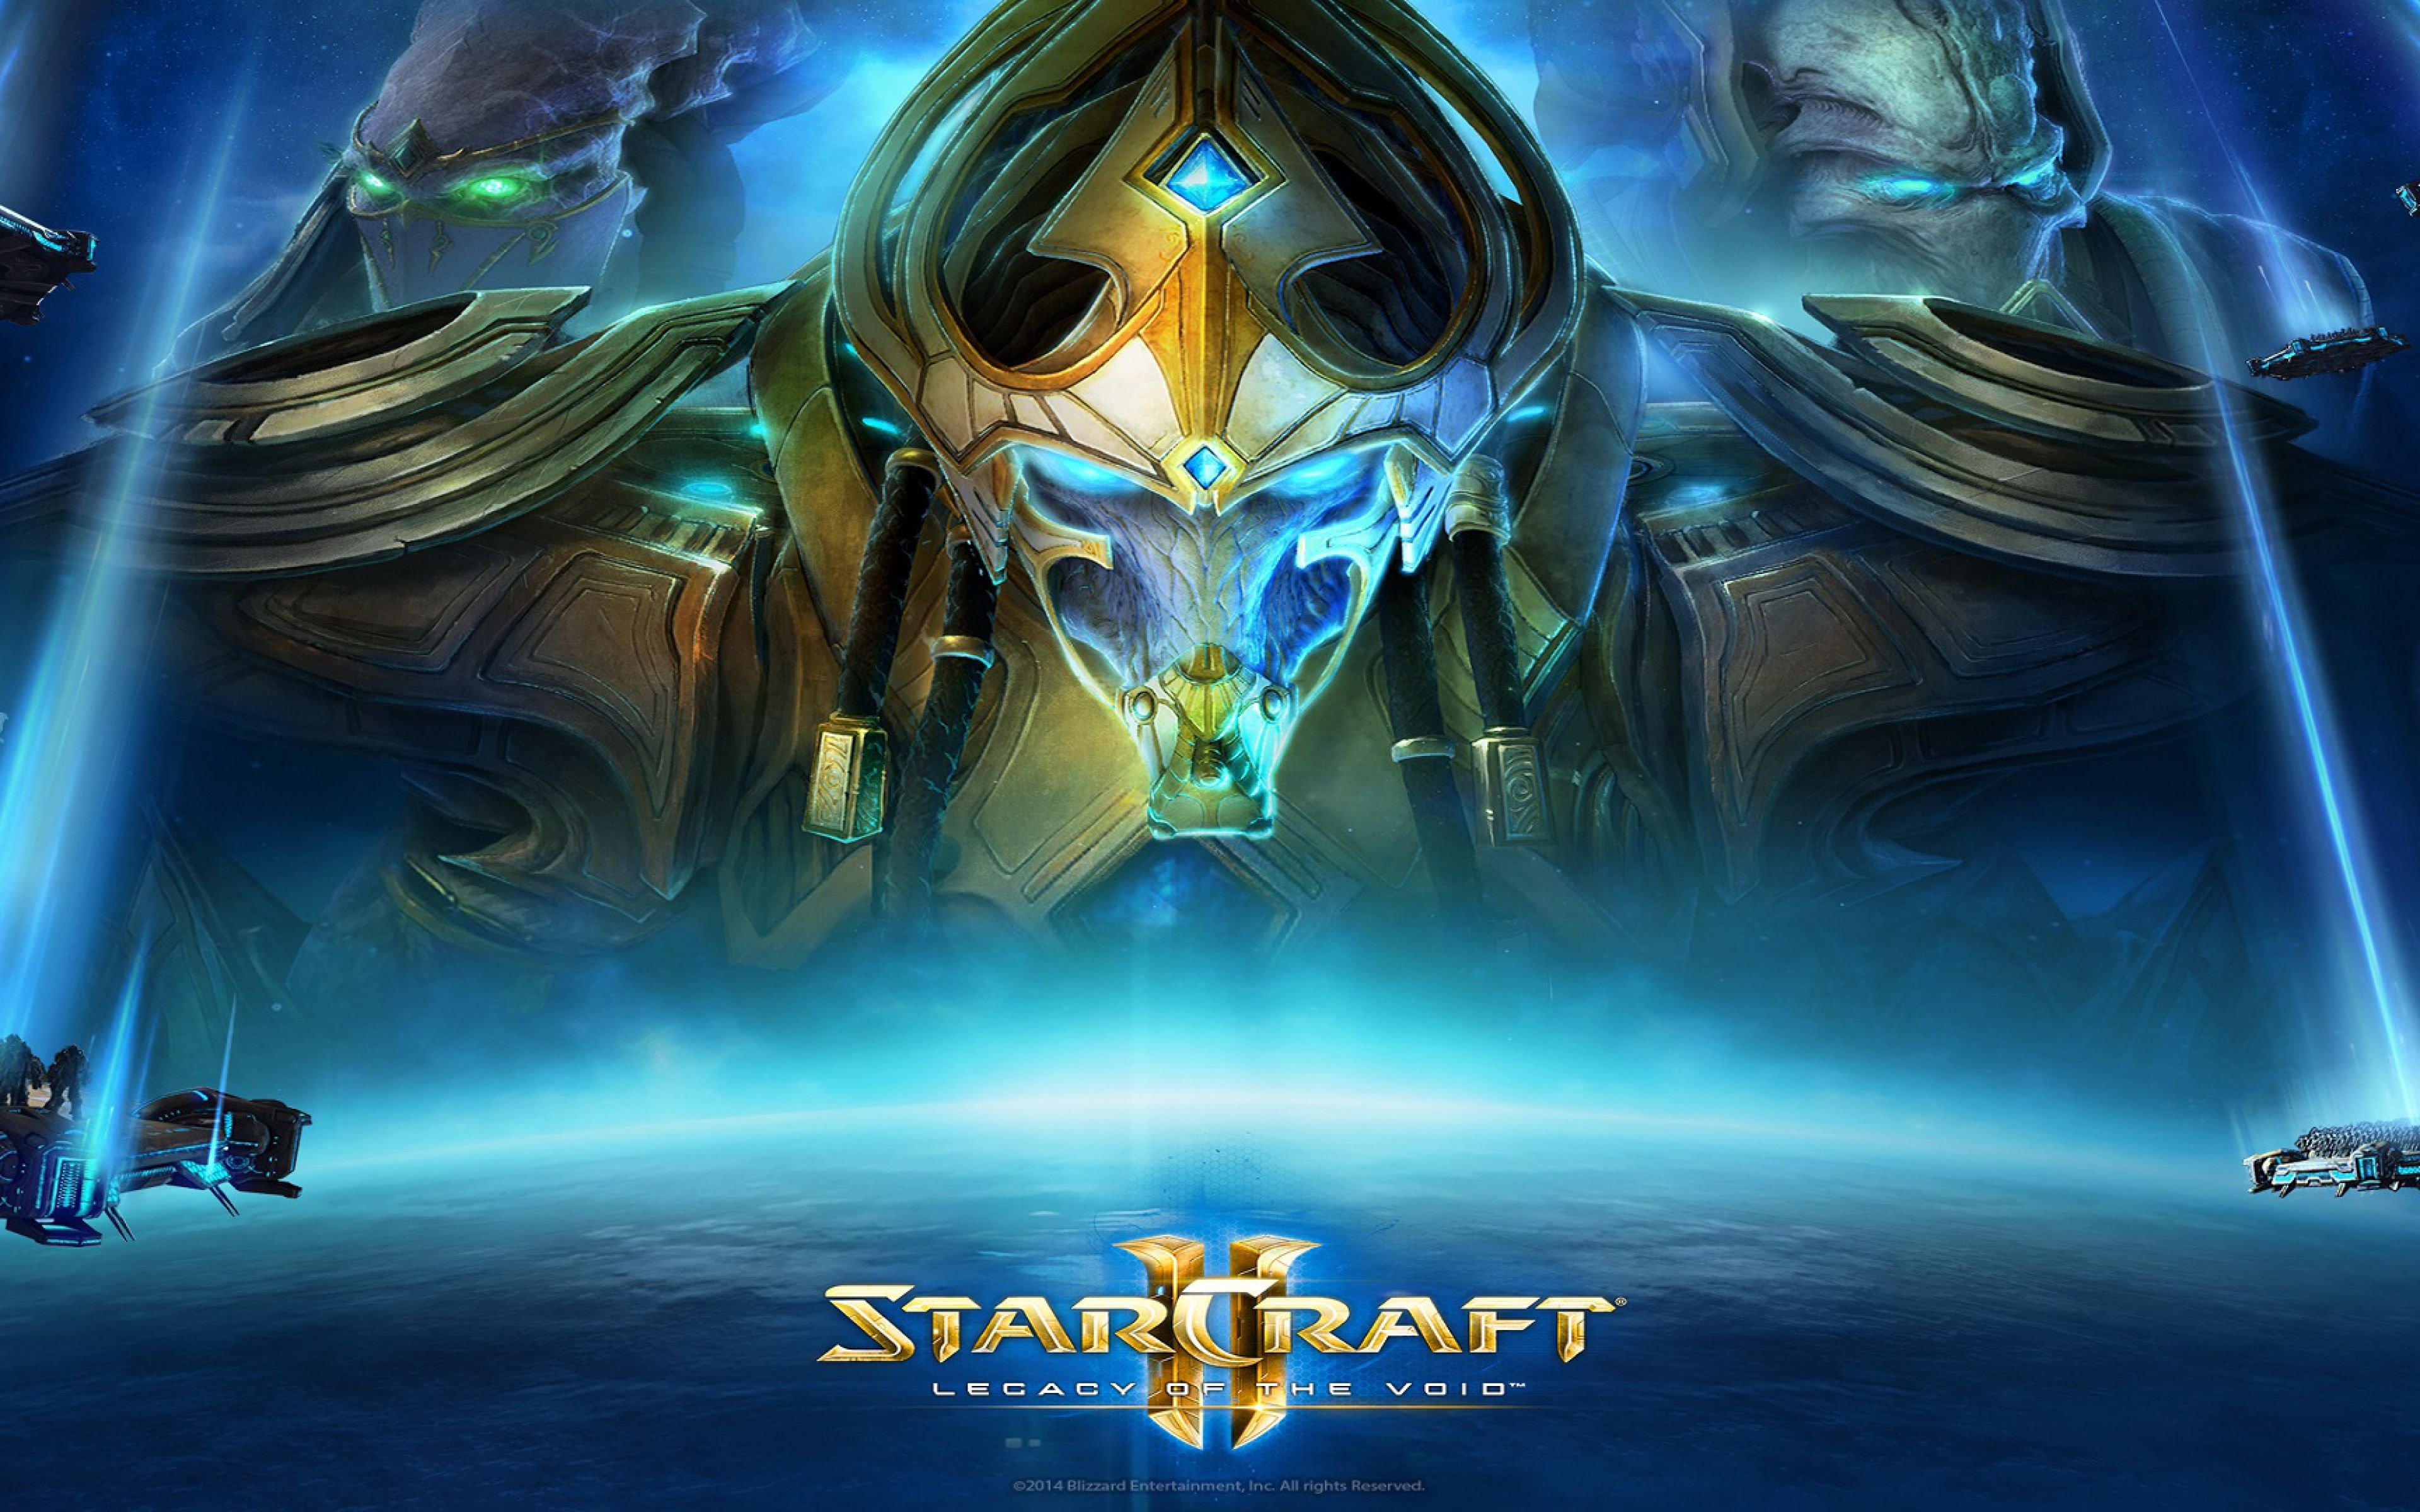 Download Wallpaper 3840x2400 Starcraft ii legacy of the void ...